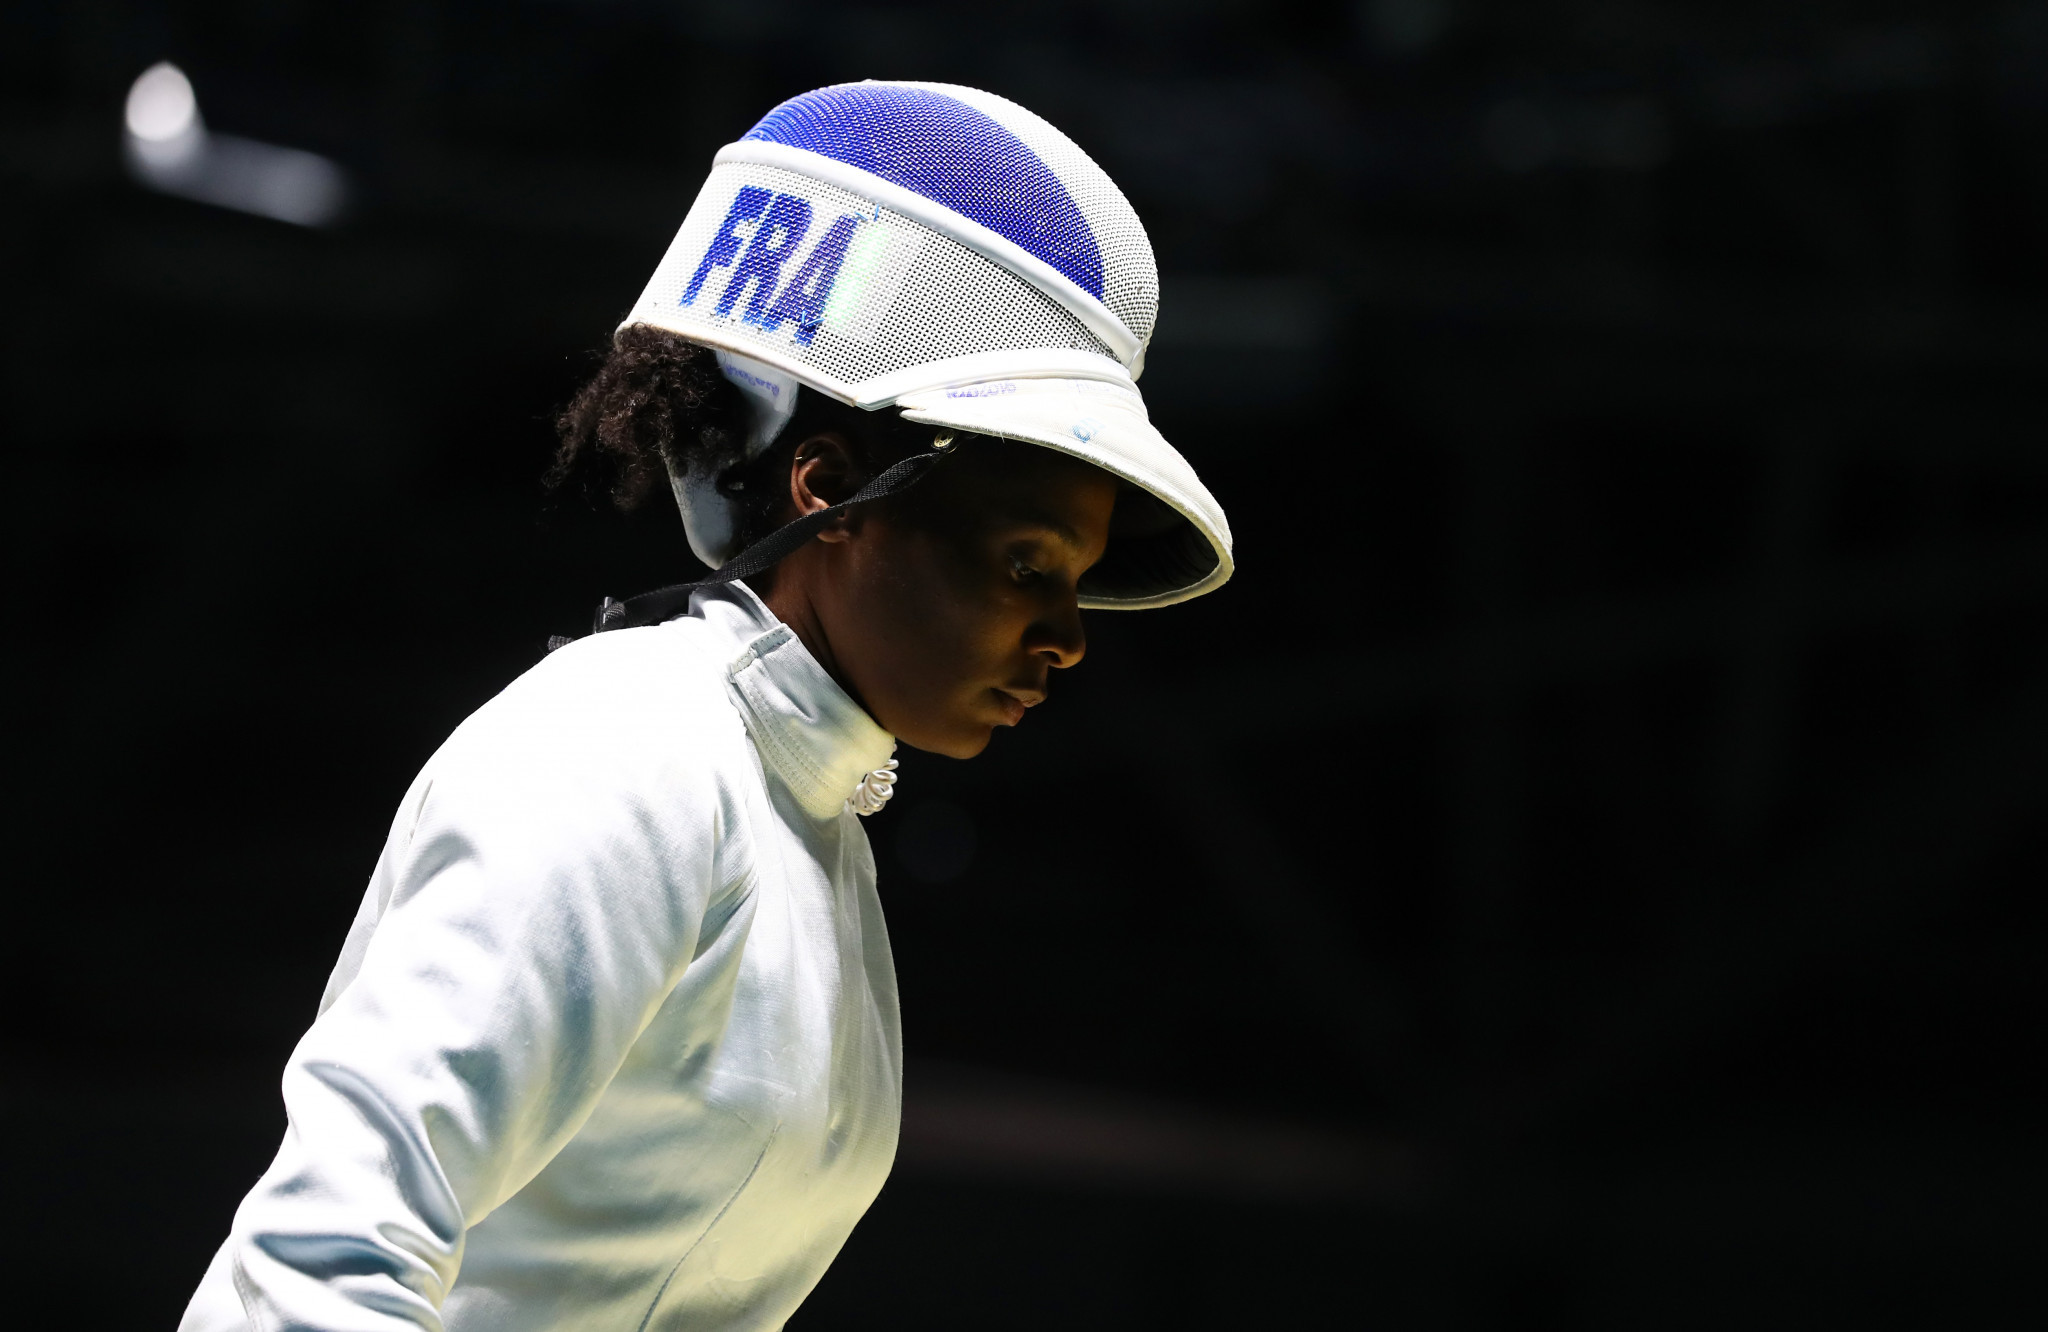 France dominate to win women's team épée gold at FIE World Cup in Barcelona